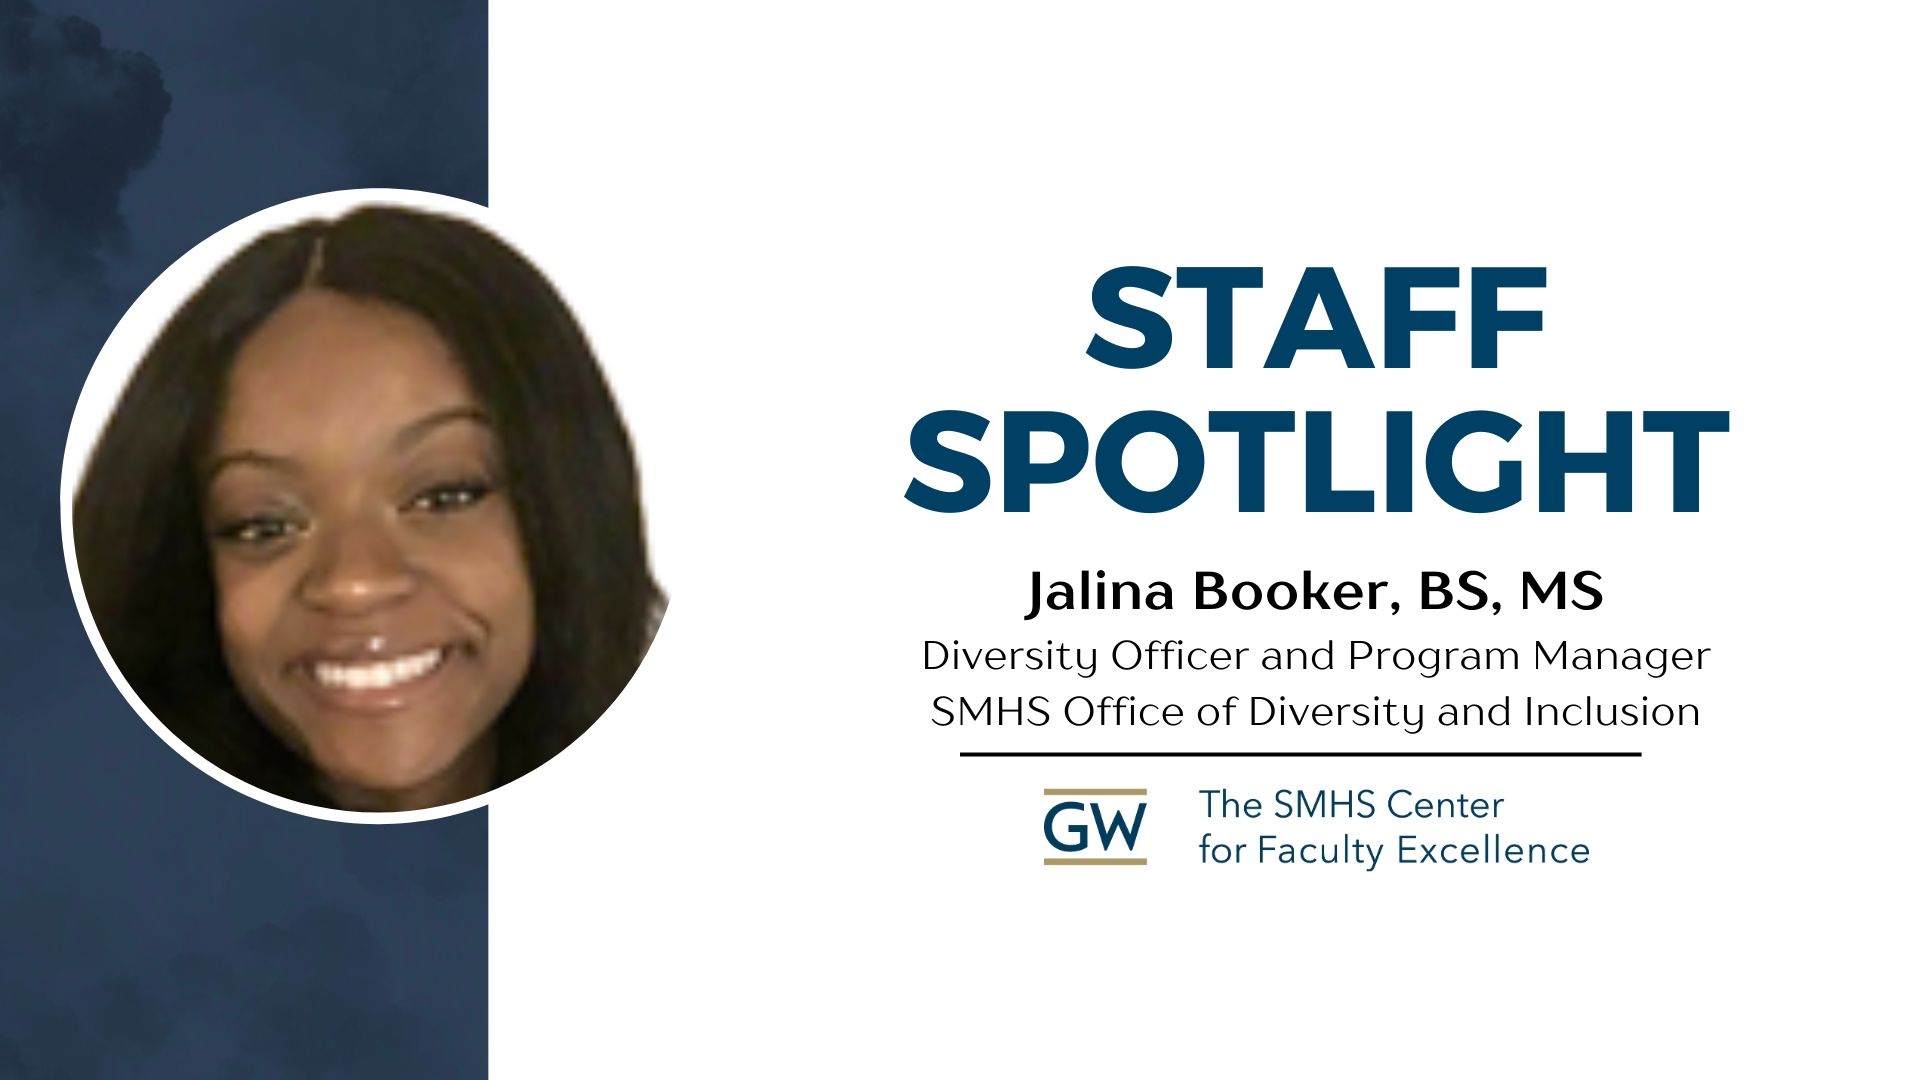 Jalina Booker, BS, MS, Program Manager of the Office of Diversity and Inclusion